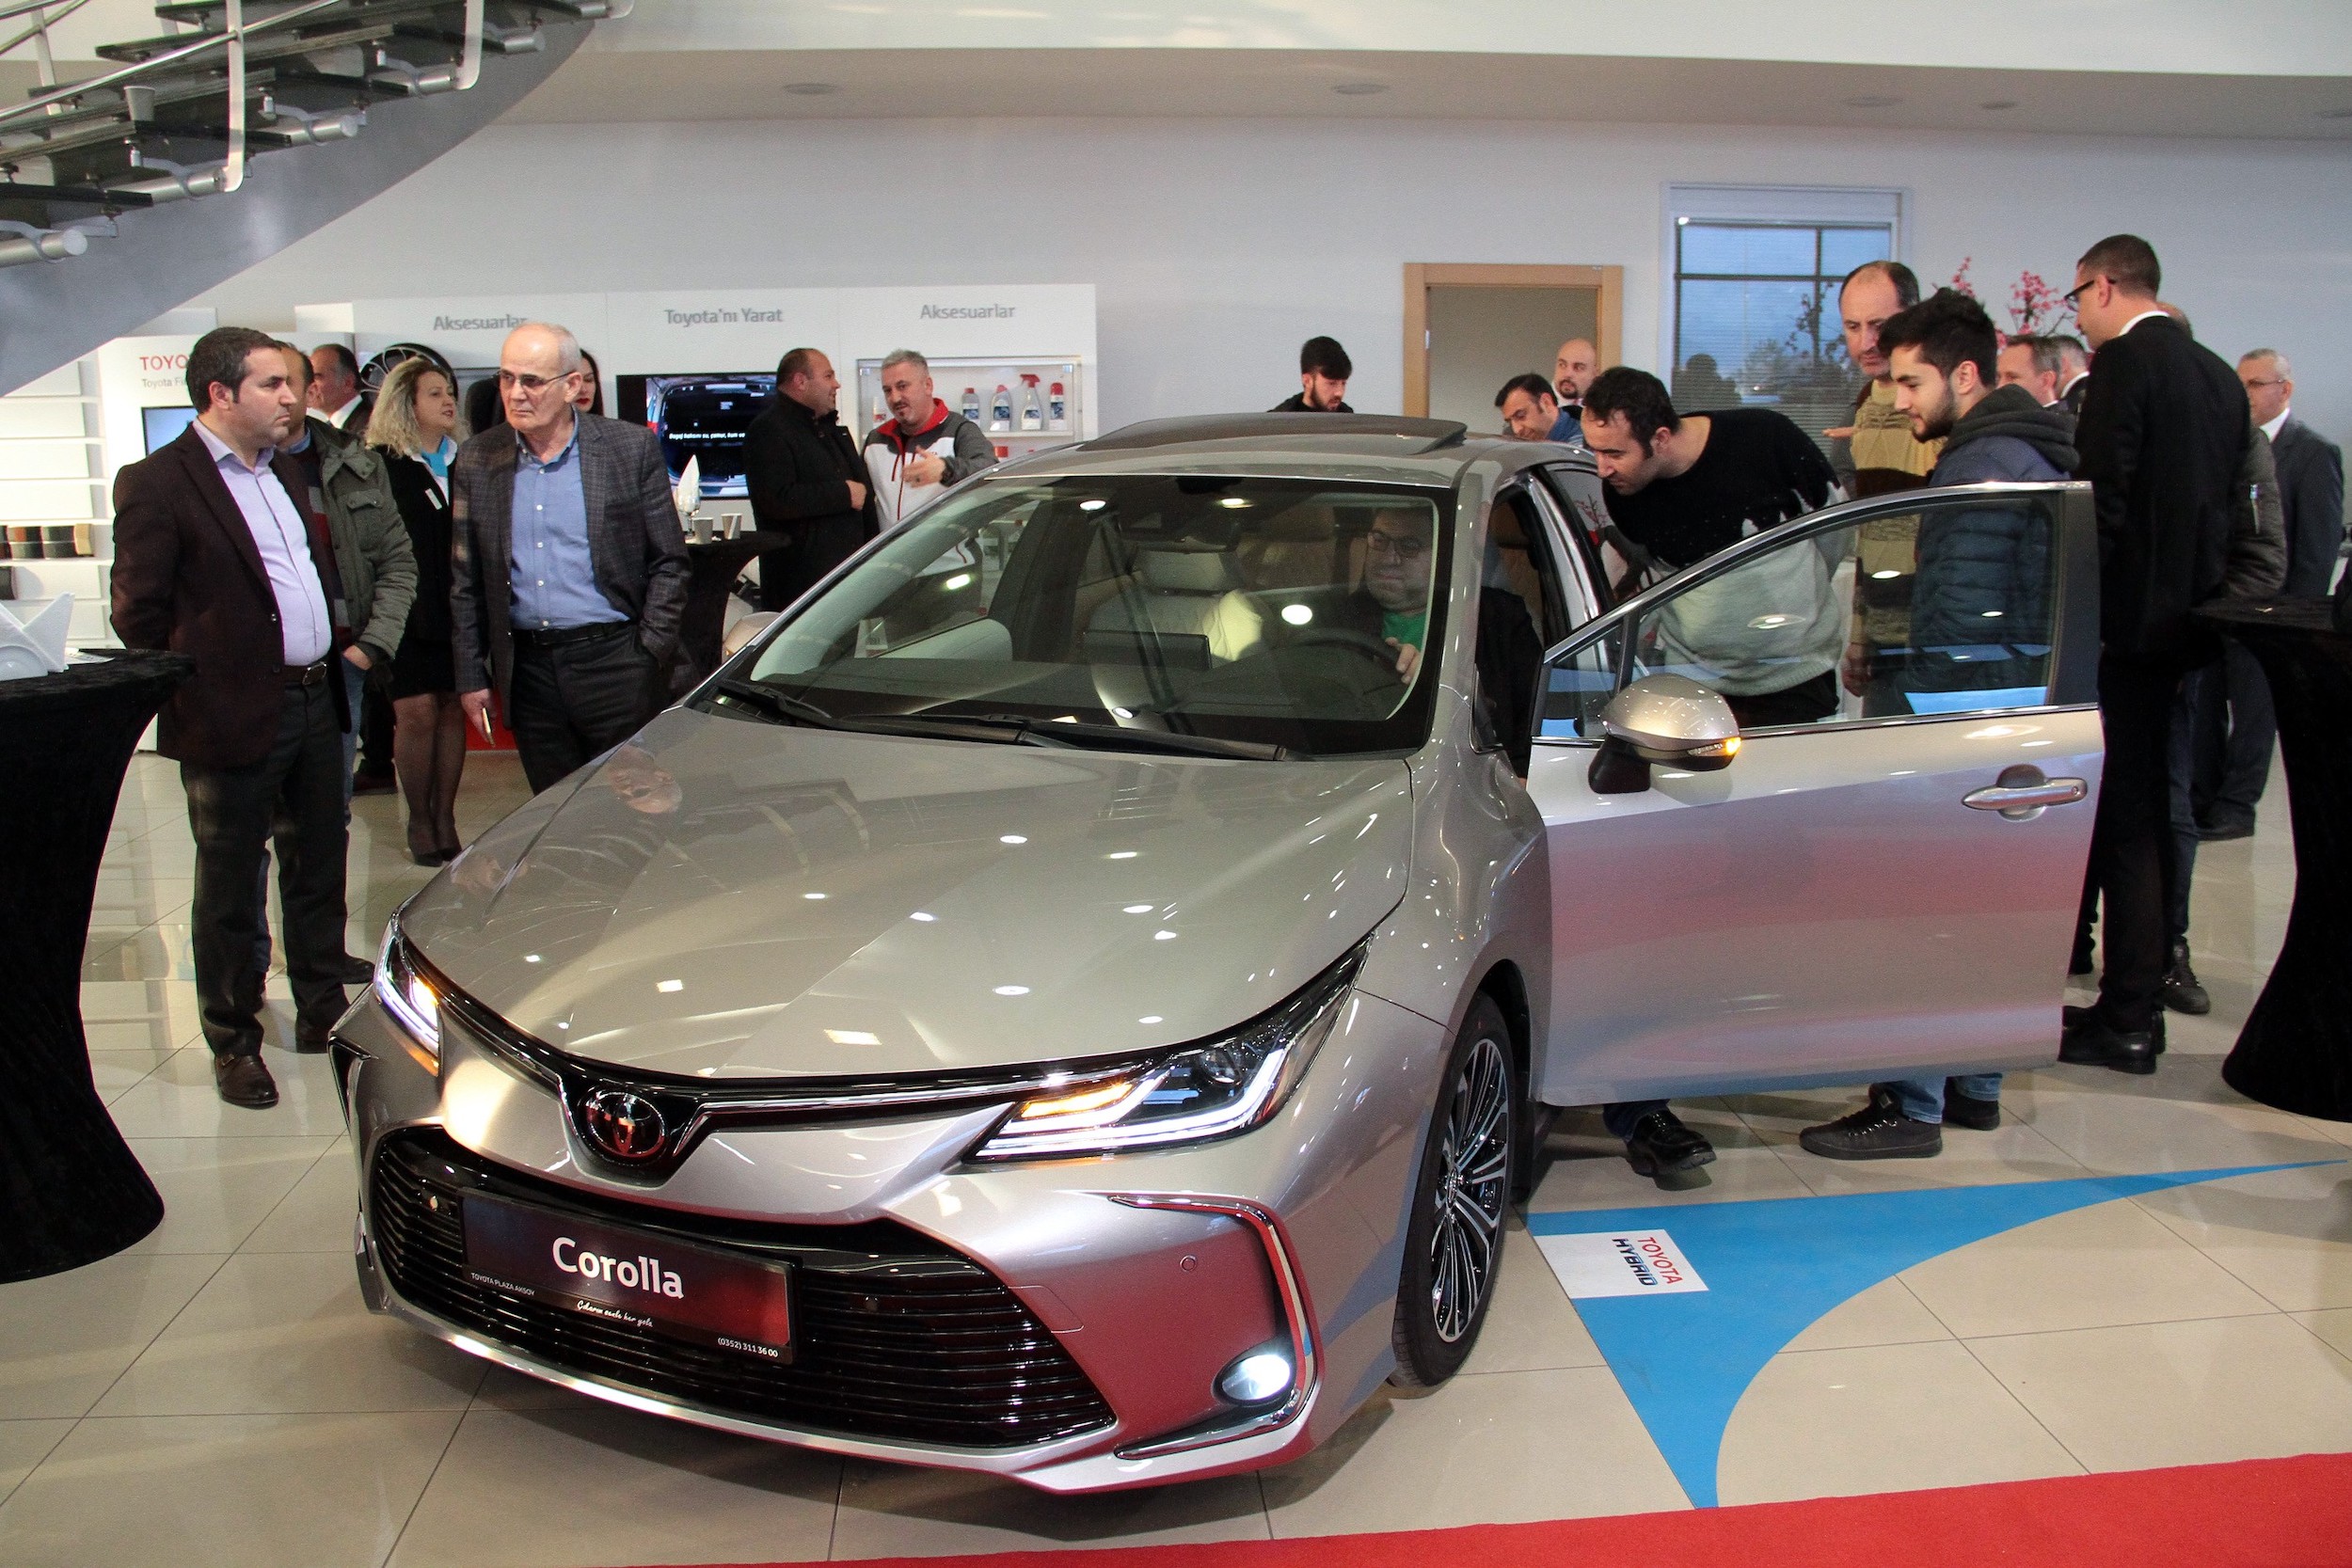 The 12th generation of the new Toyota Corolla is being exhibited during the introductory meeting at the Kayseri Toyota Plaza Aksoy